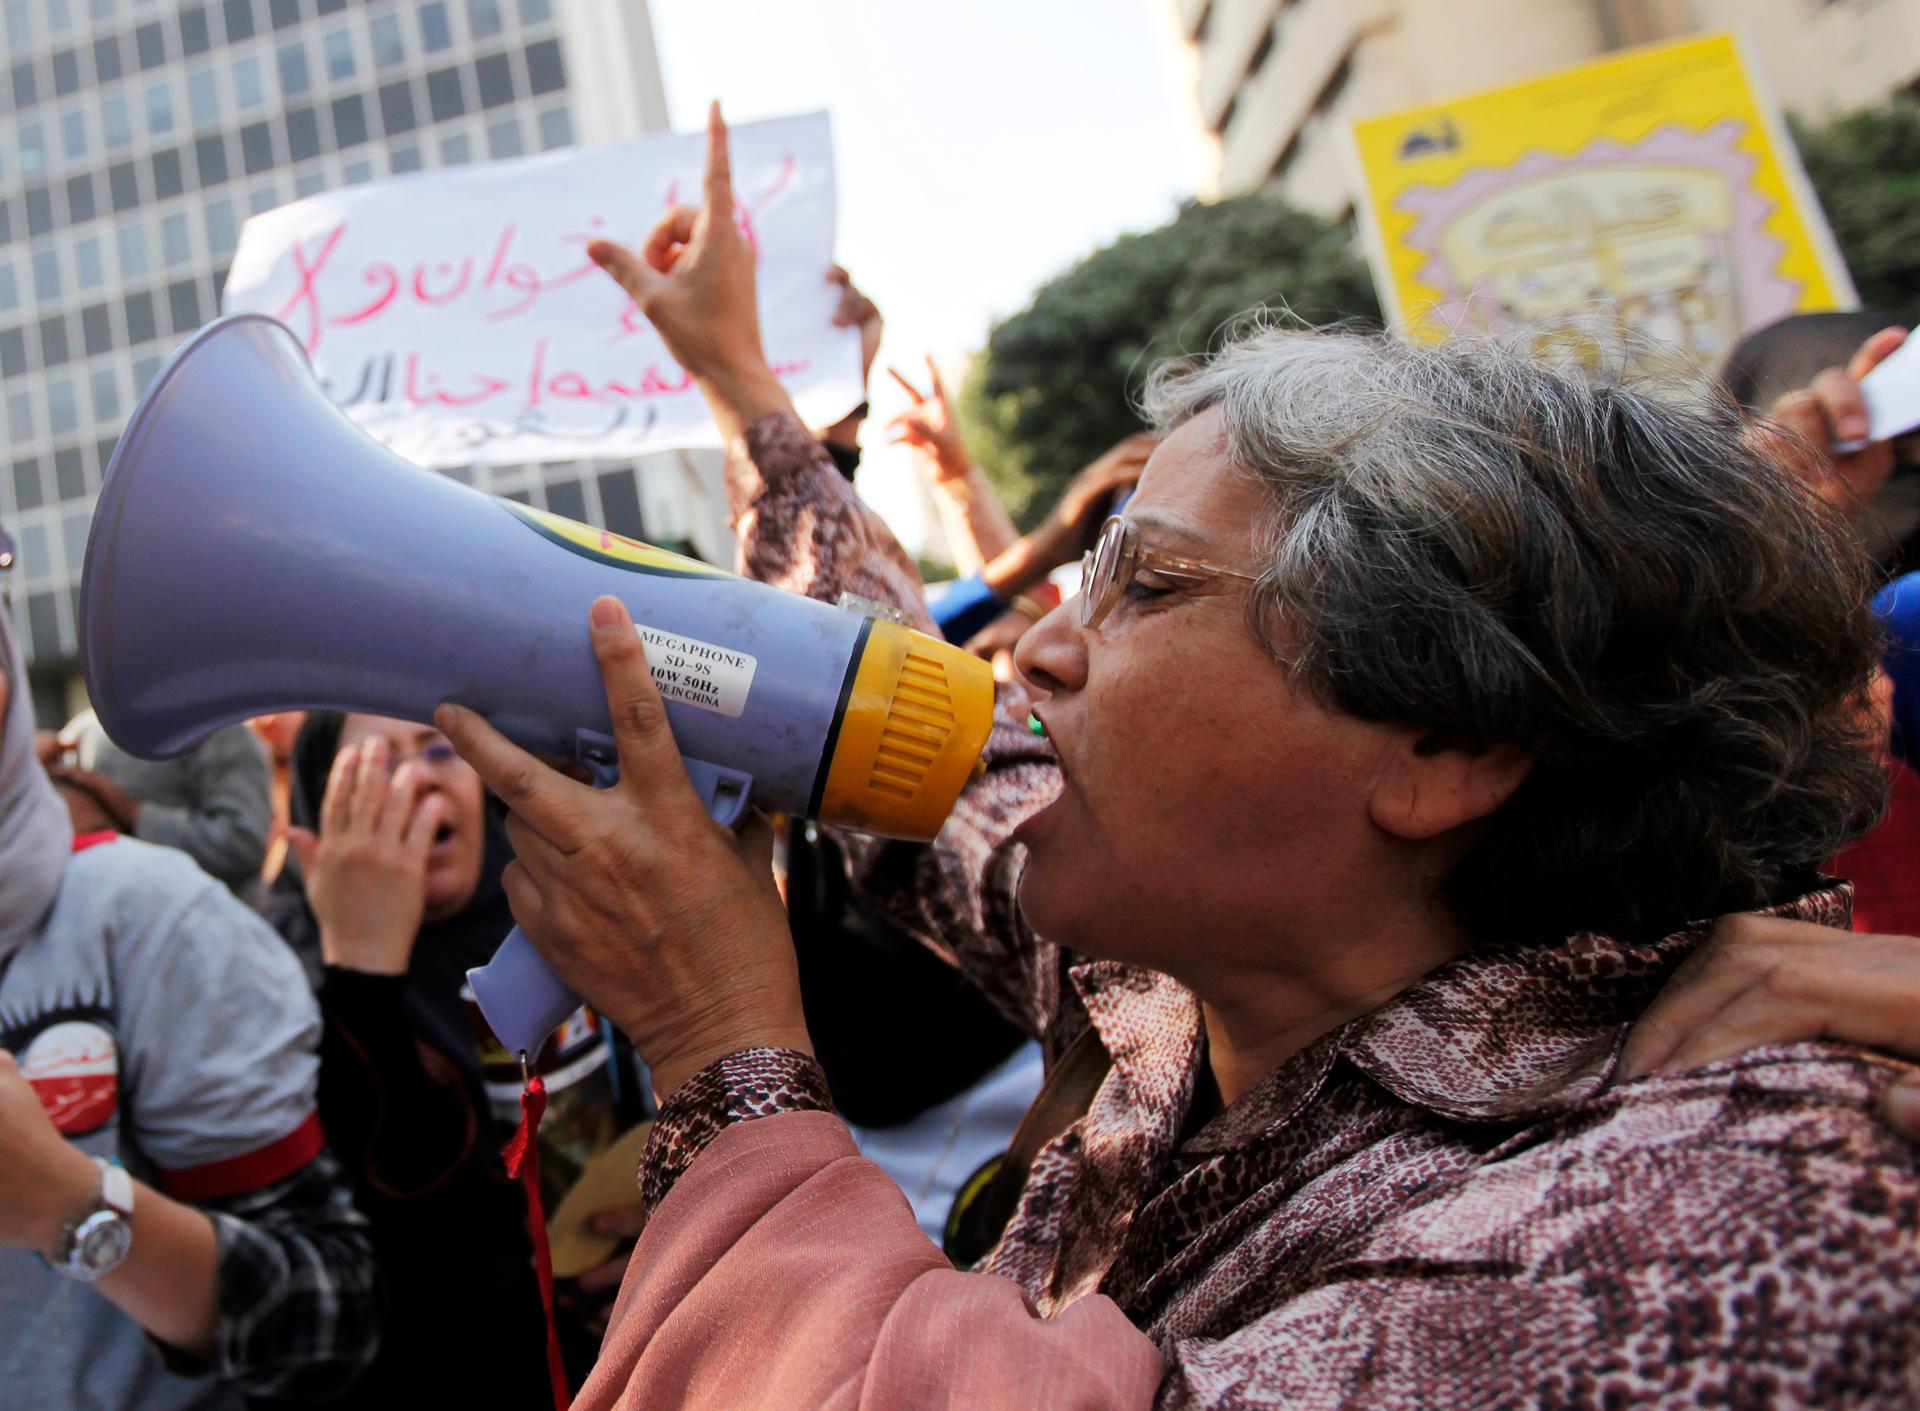 Women protest during the Arab Spring